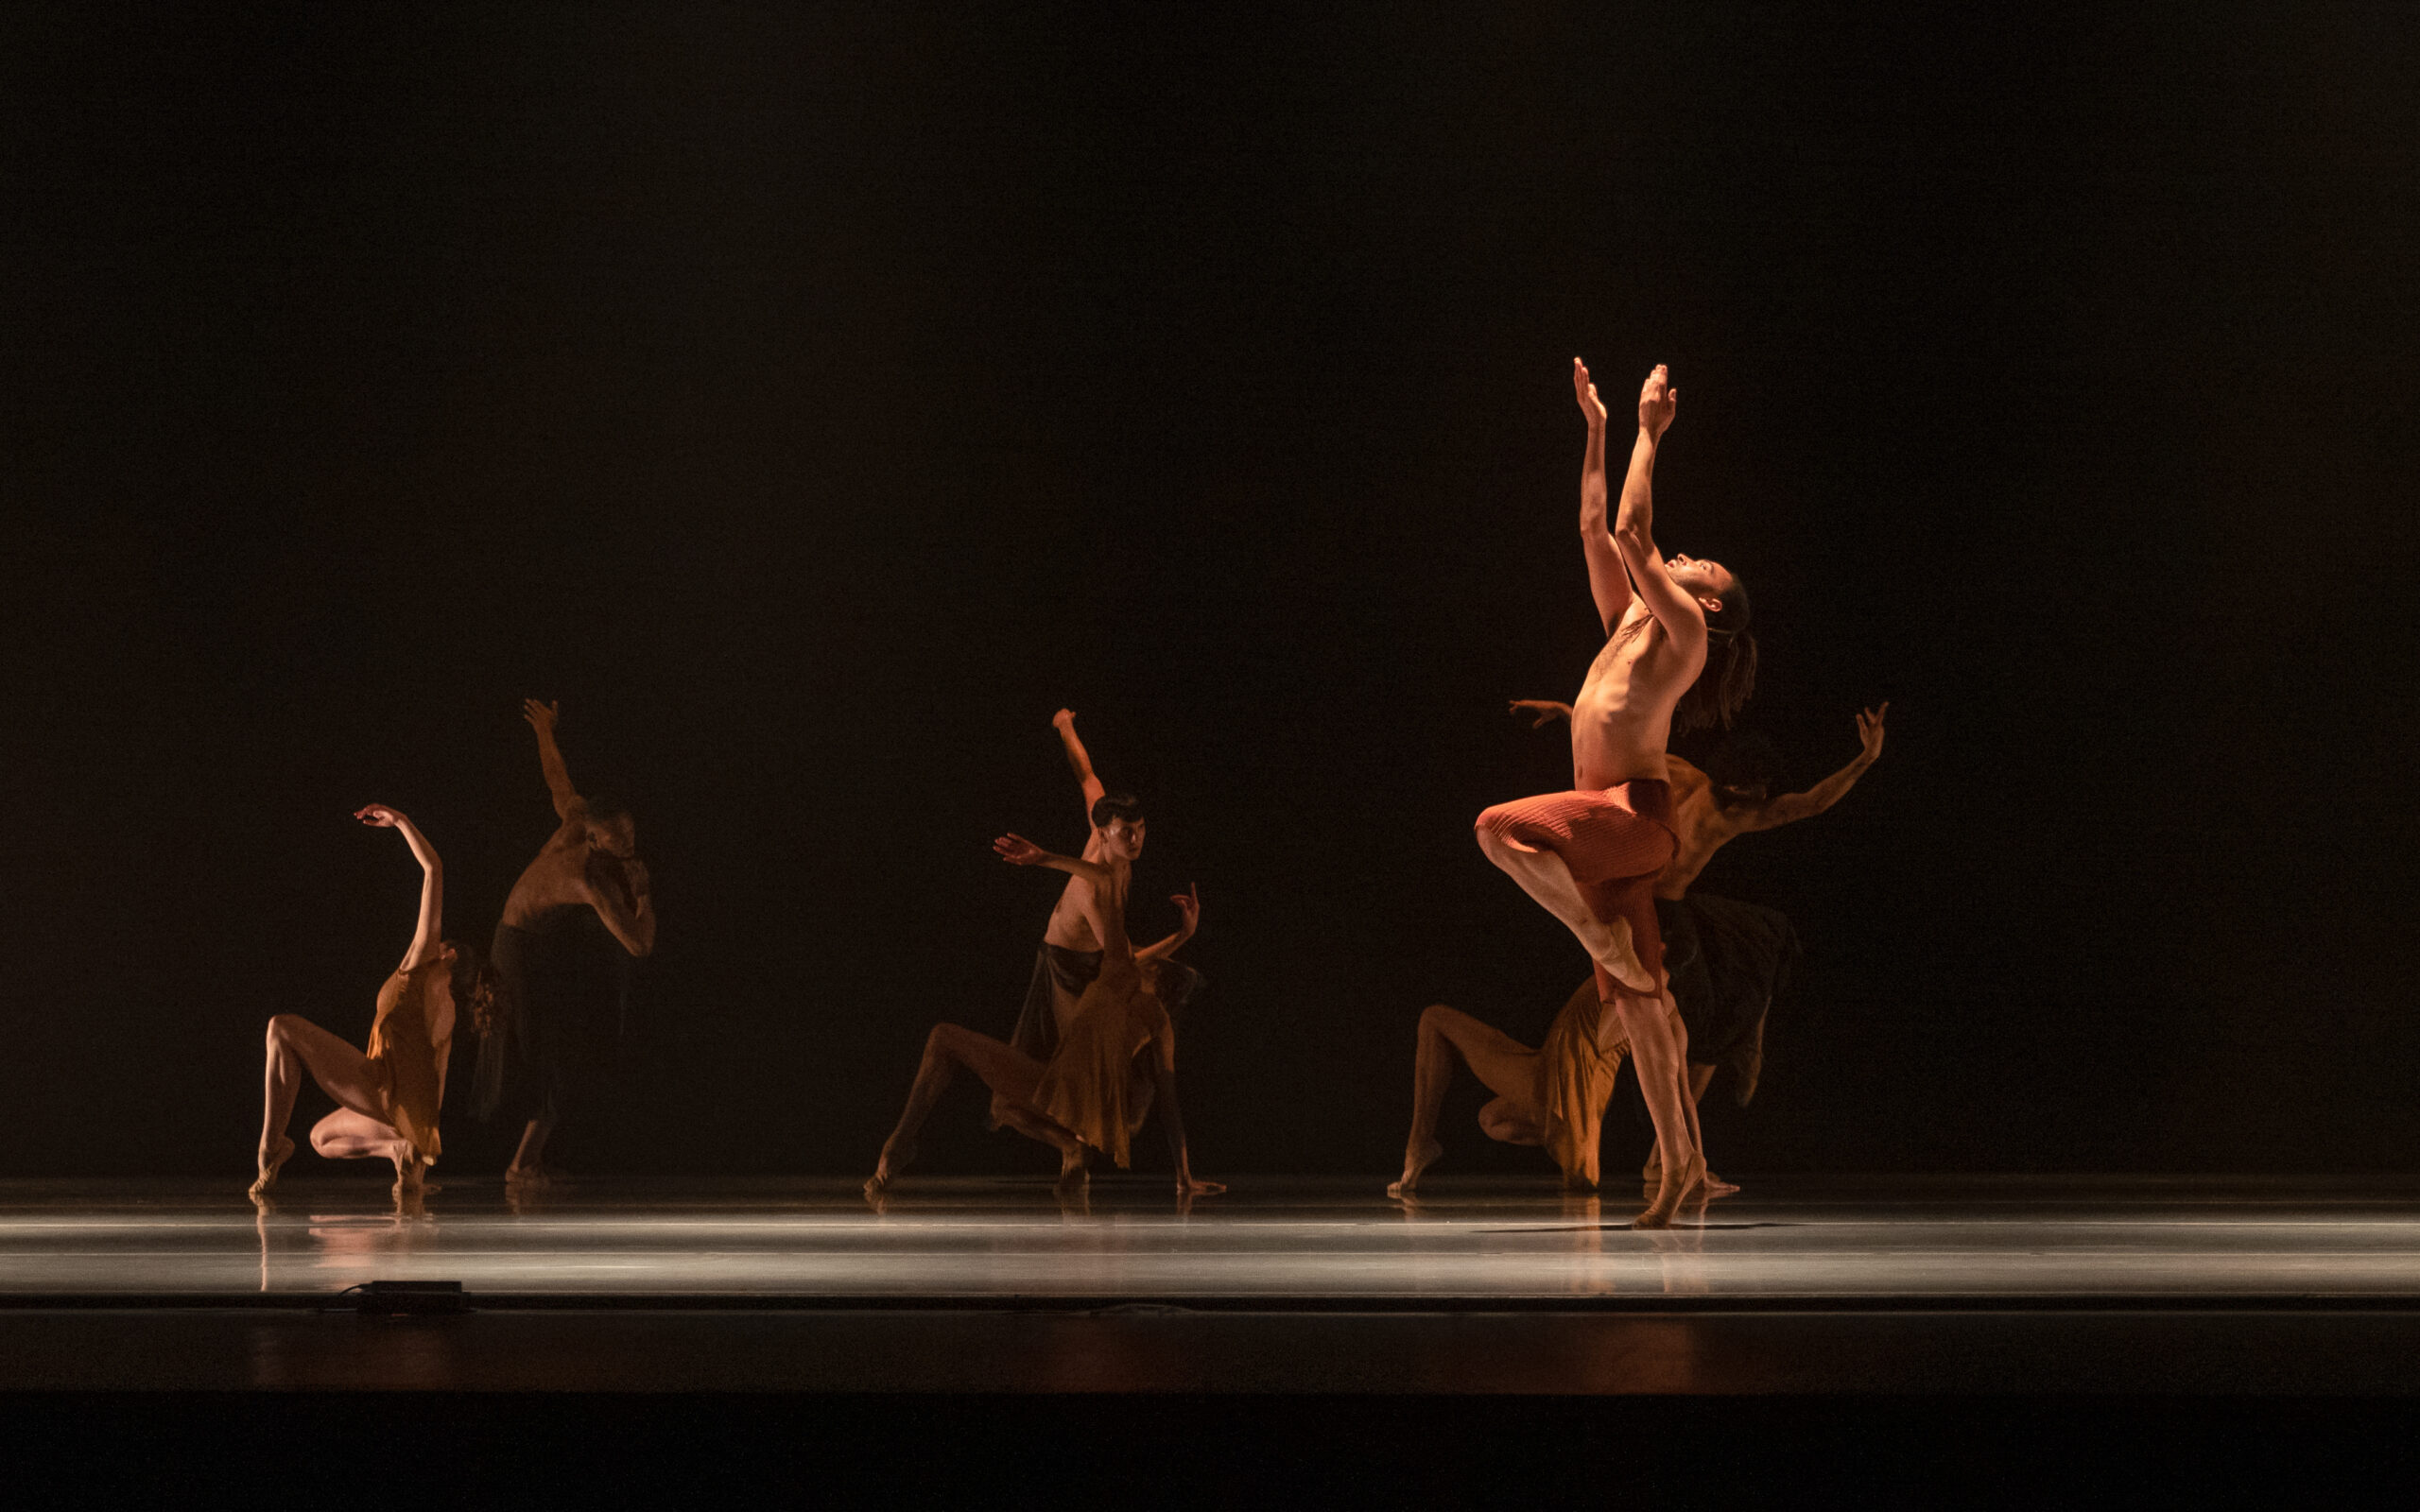 Alonzo King LINES Ballet company artists performing "Deep River" on stage